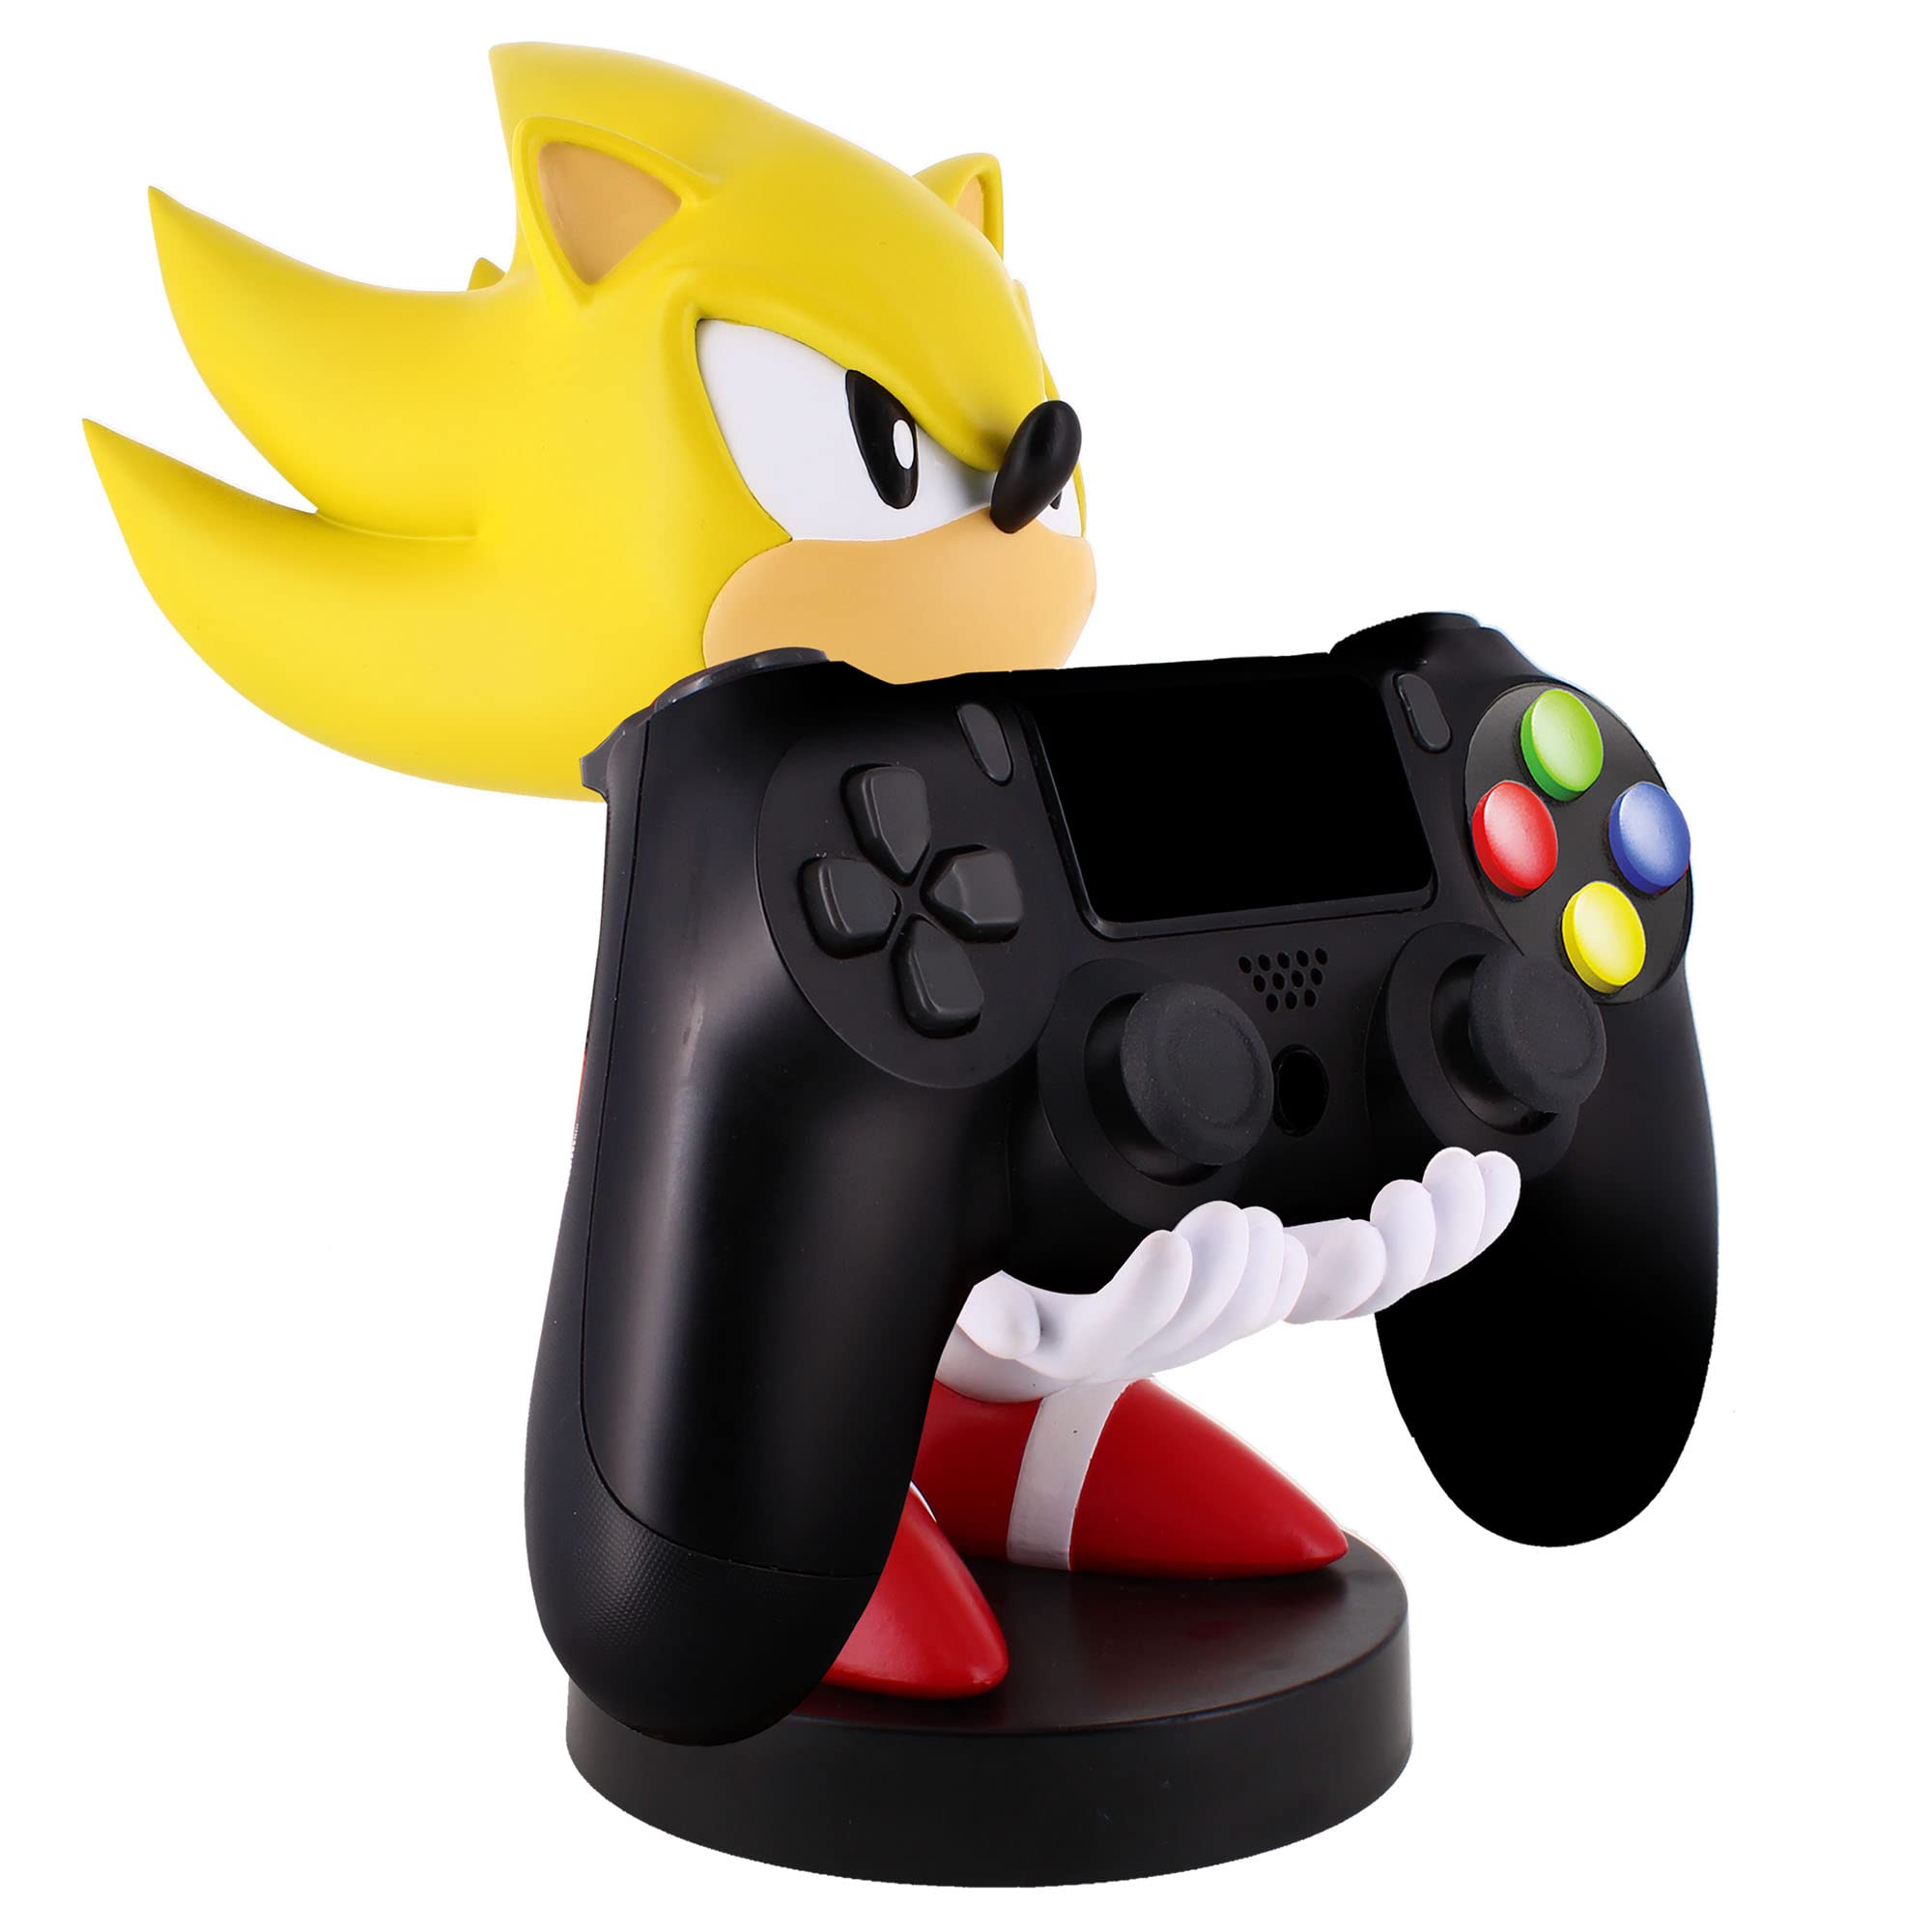 Exquisite Gaming Cable Guy: Phone/Controller Holder - SEGA Super Sonic, Includes a 4 Foot Charging Cable, Heavy Duty PVC Statue and Sturdy Base to Hold Your Stuff without Tipping Over